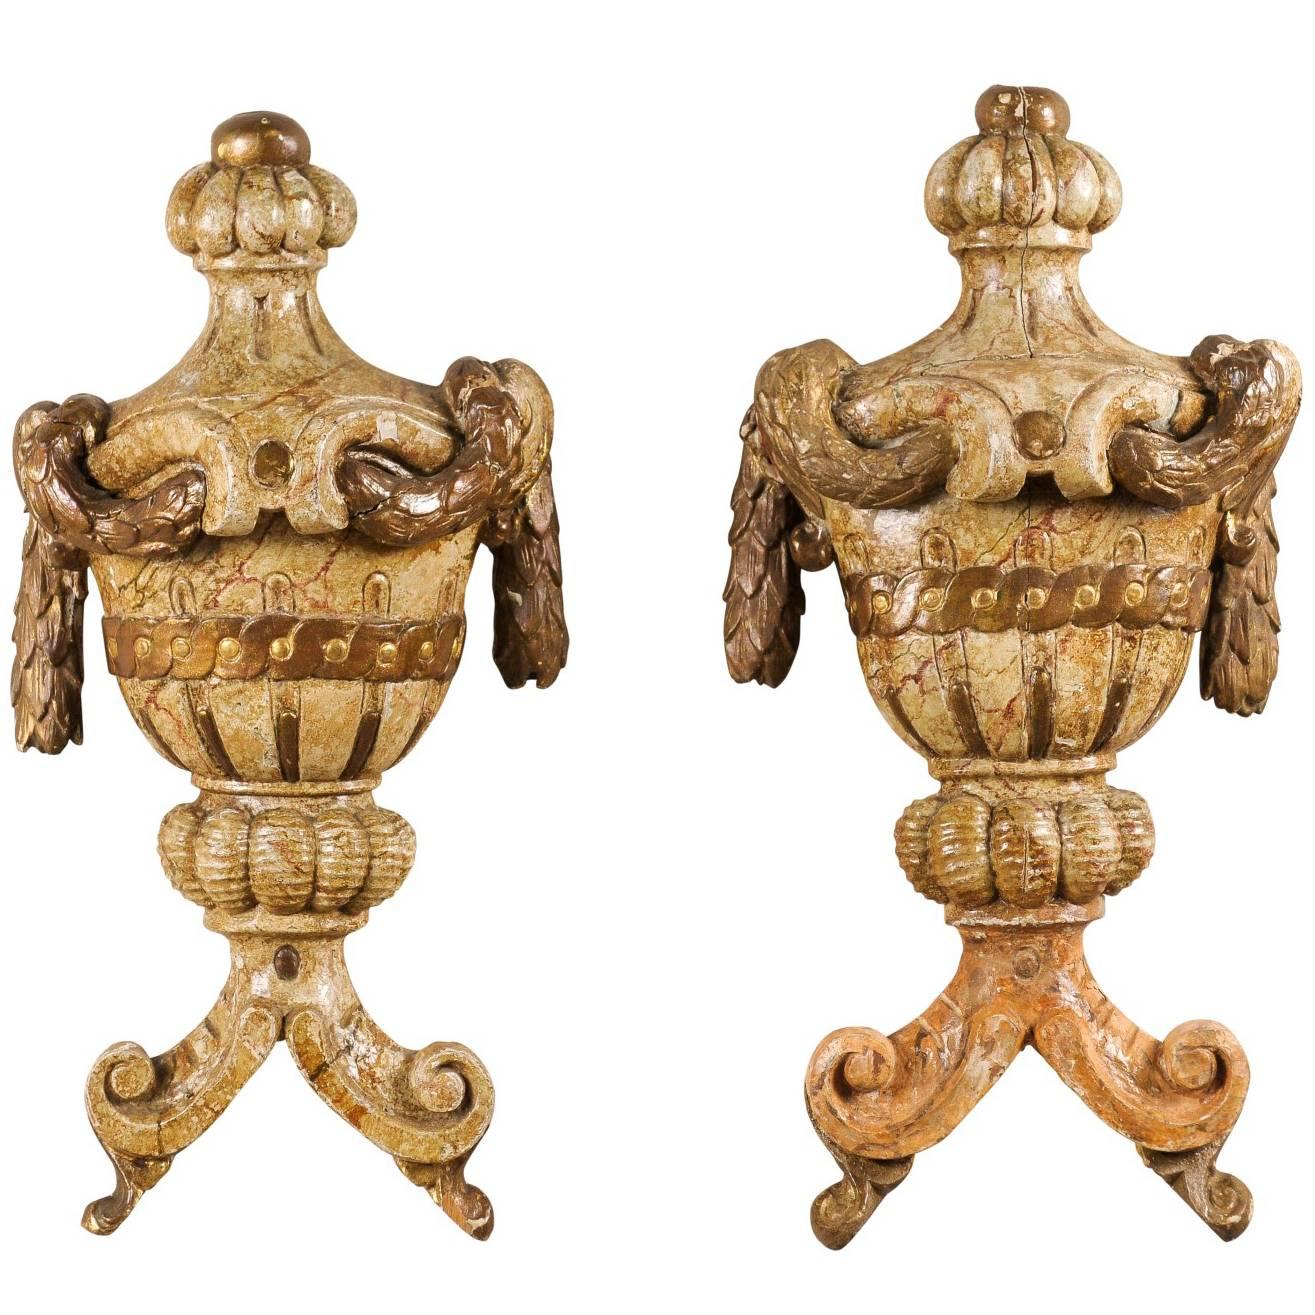 Pair of Wood Wall Hanging Architectural Fragment Ornaments Representing Urns